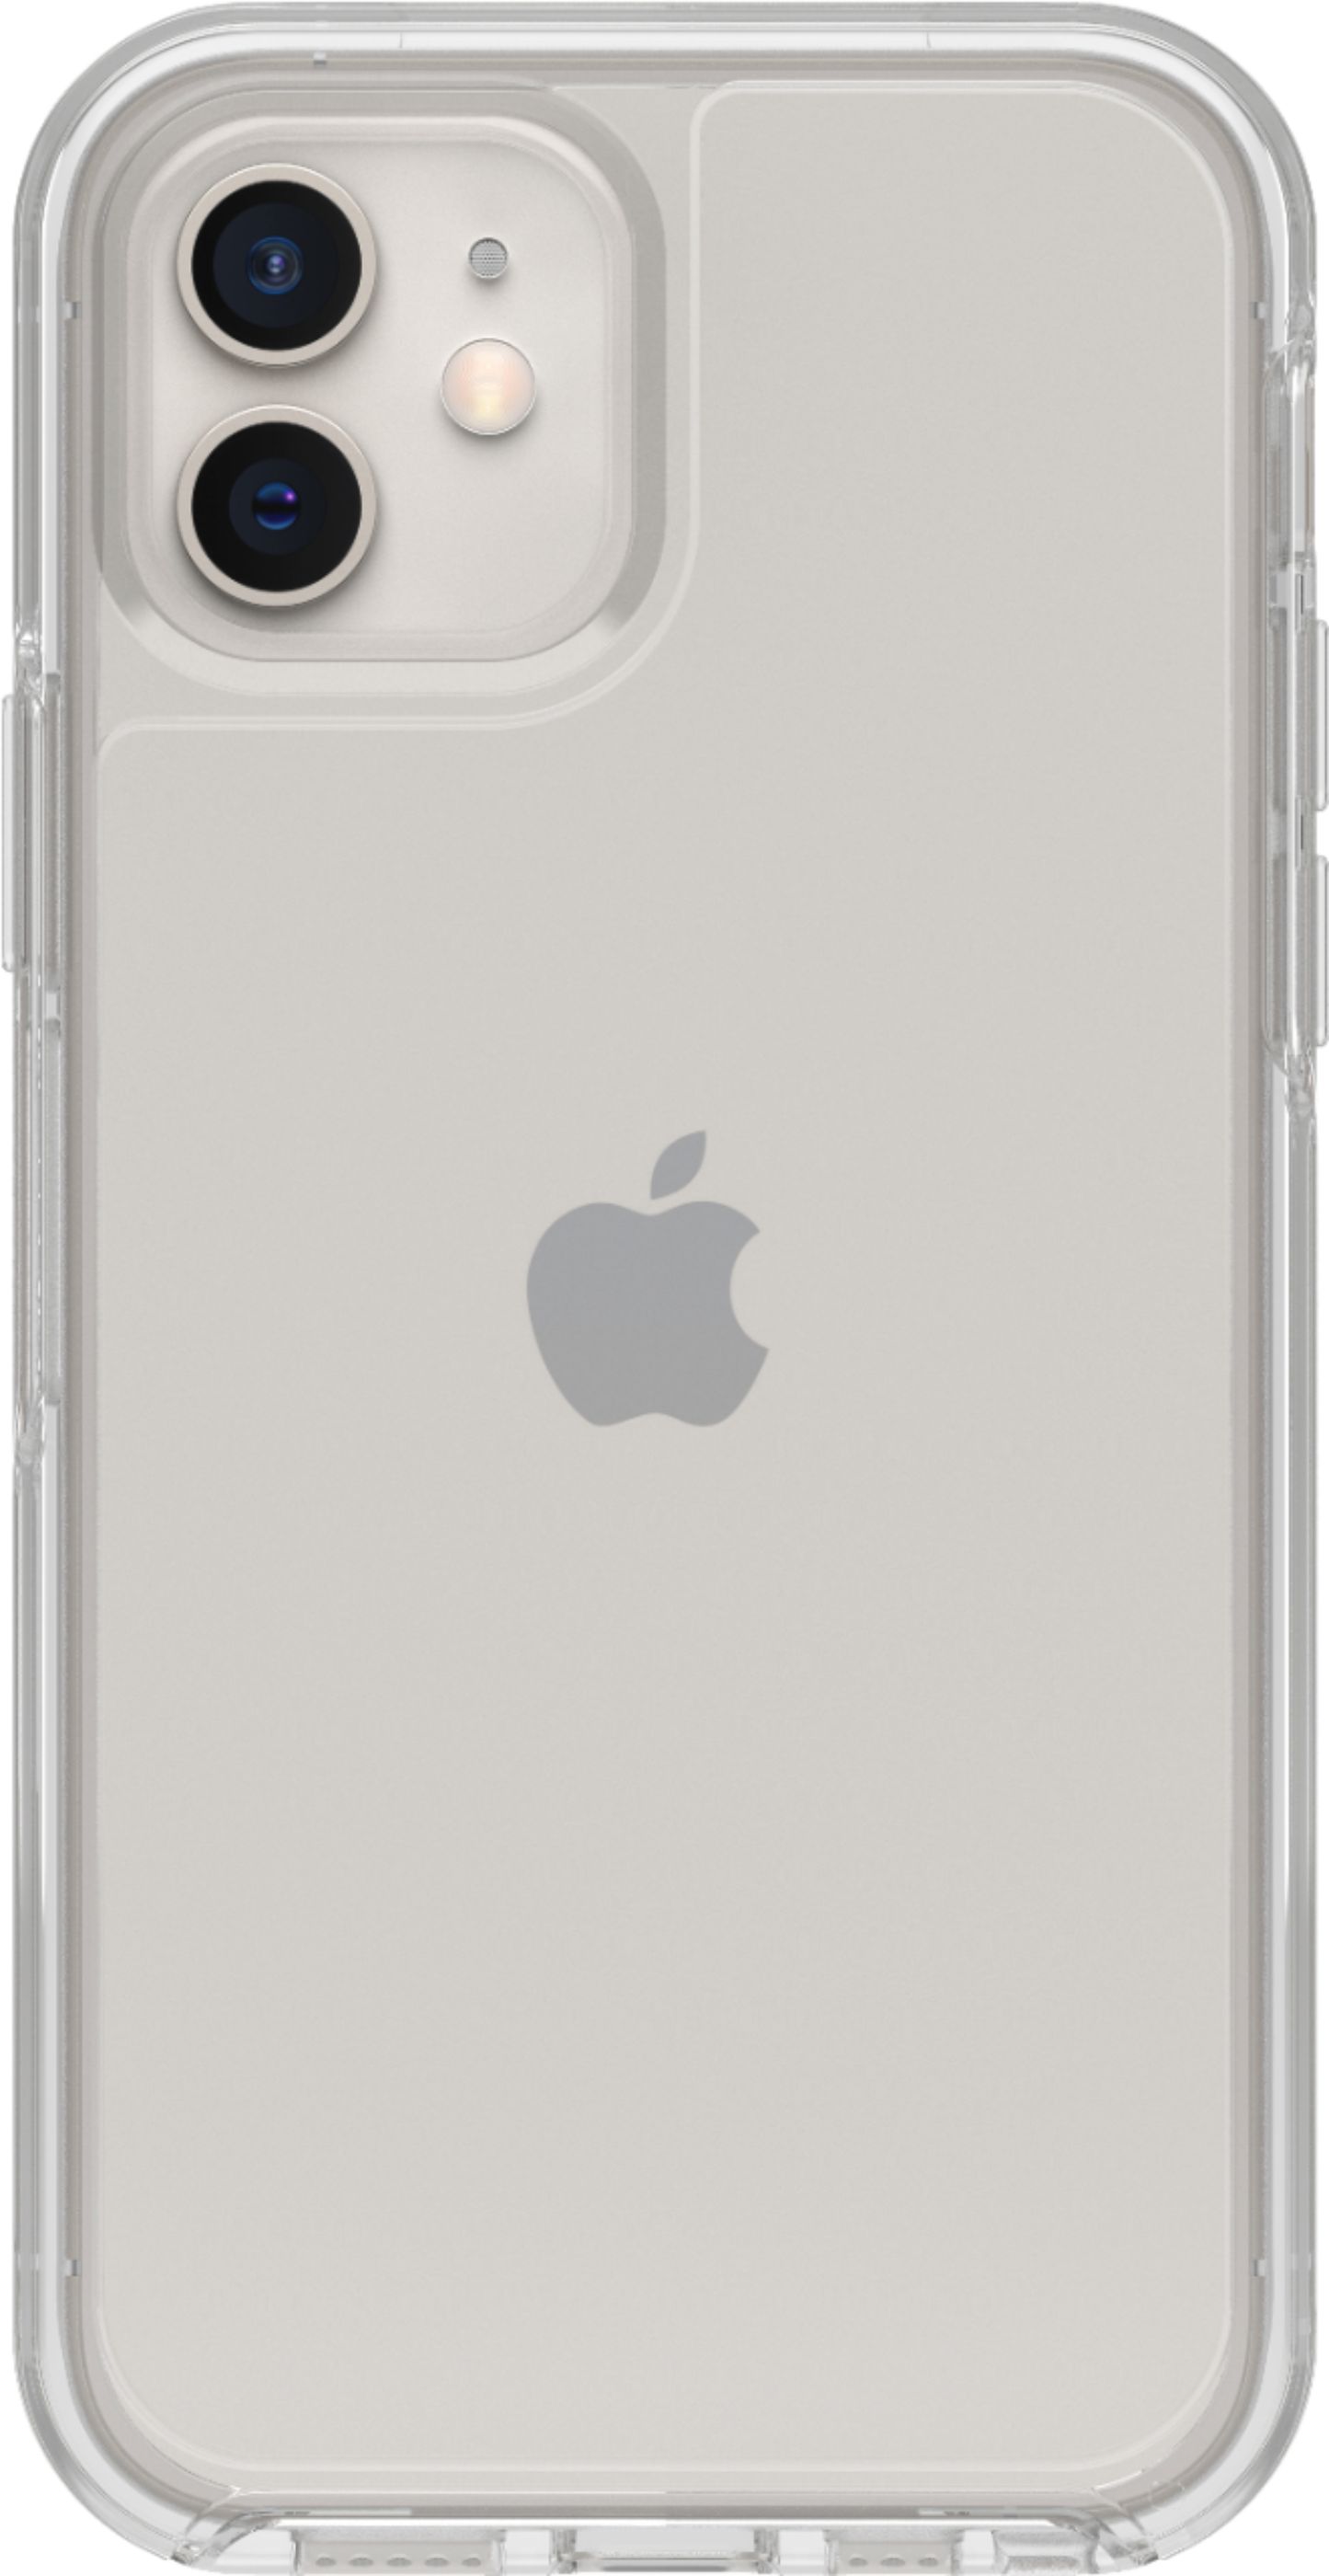 OtterBox Symmetry Series Case for iPhone 12 & iPhone 12 Pro Clear